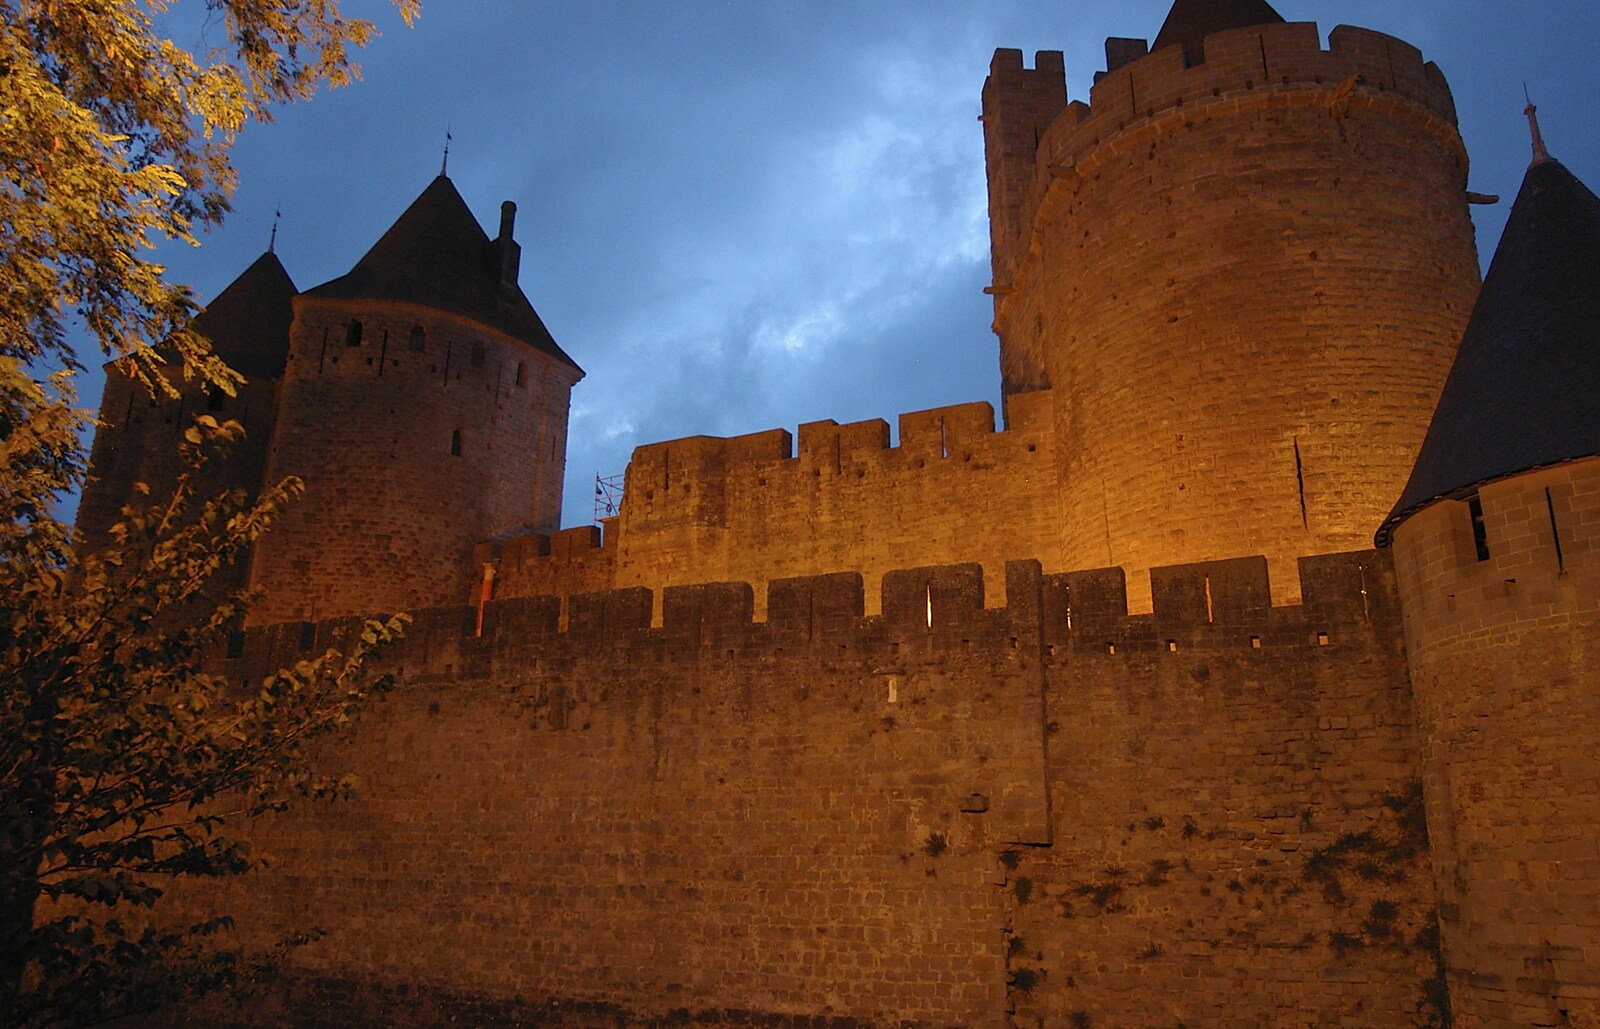 We head back into La Cité, which is nicely lit up from A Couple of Days in Carcassonne, Aude, France - 21st September 2006